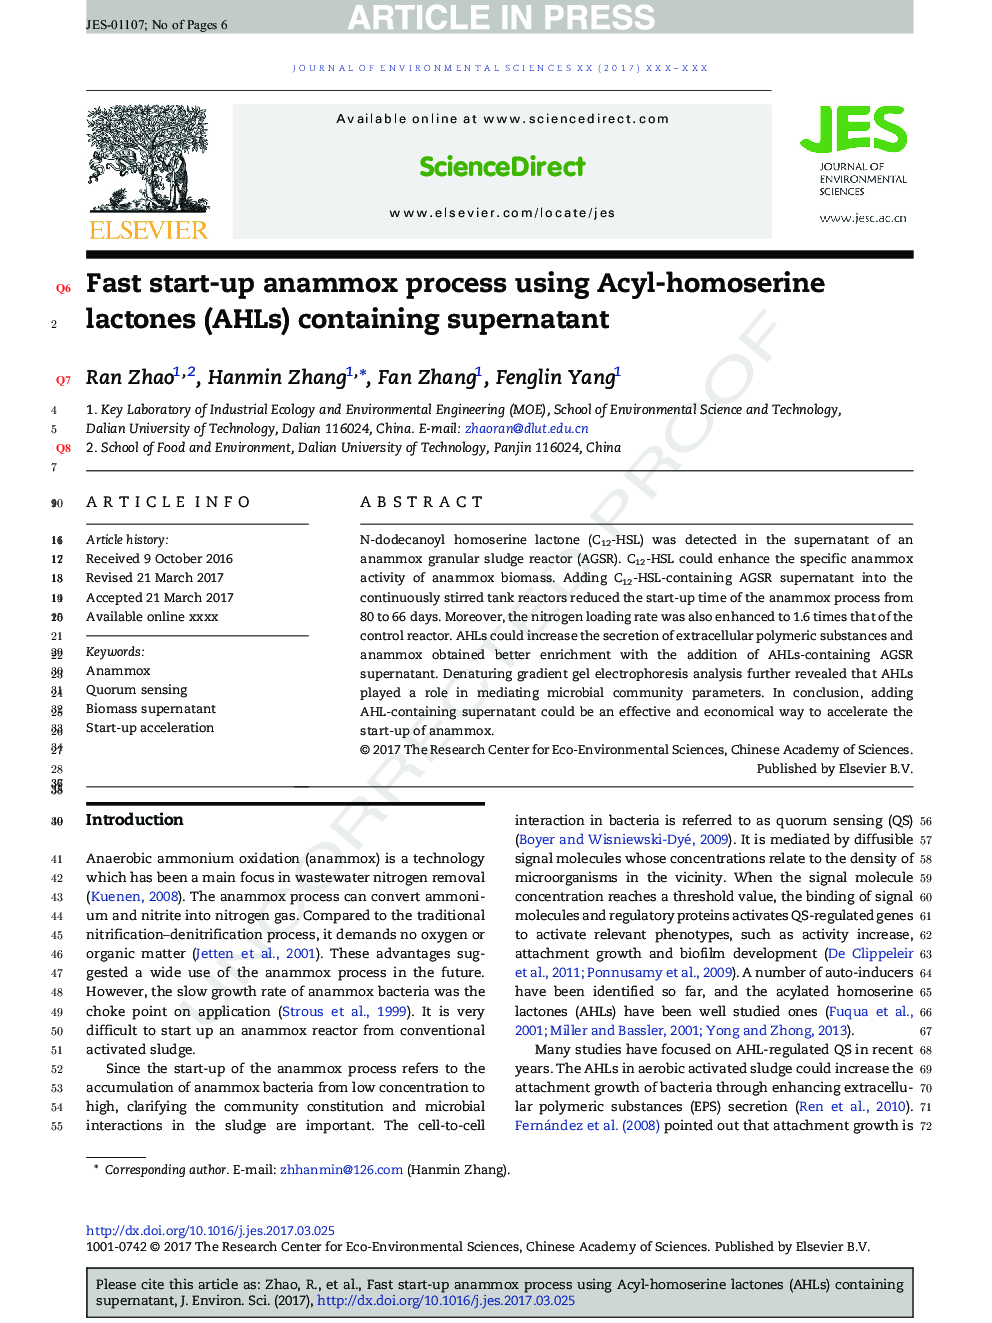 Fast start-up anammox process using Acyl-homoserine lactones (AHLs) containing supernatant